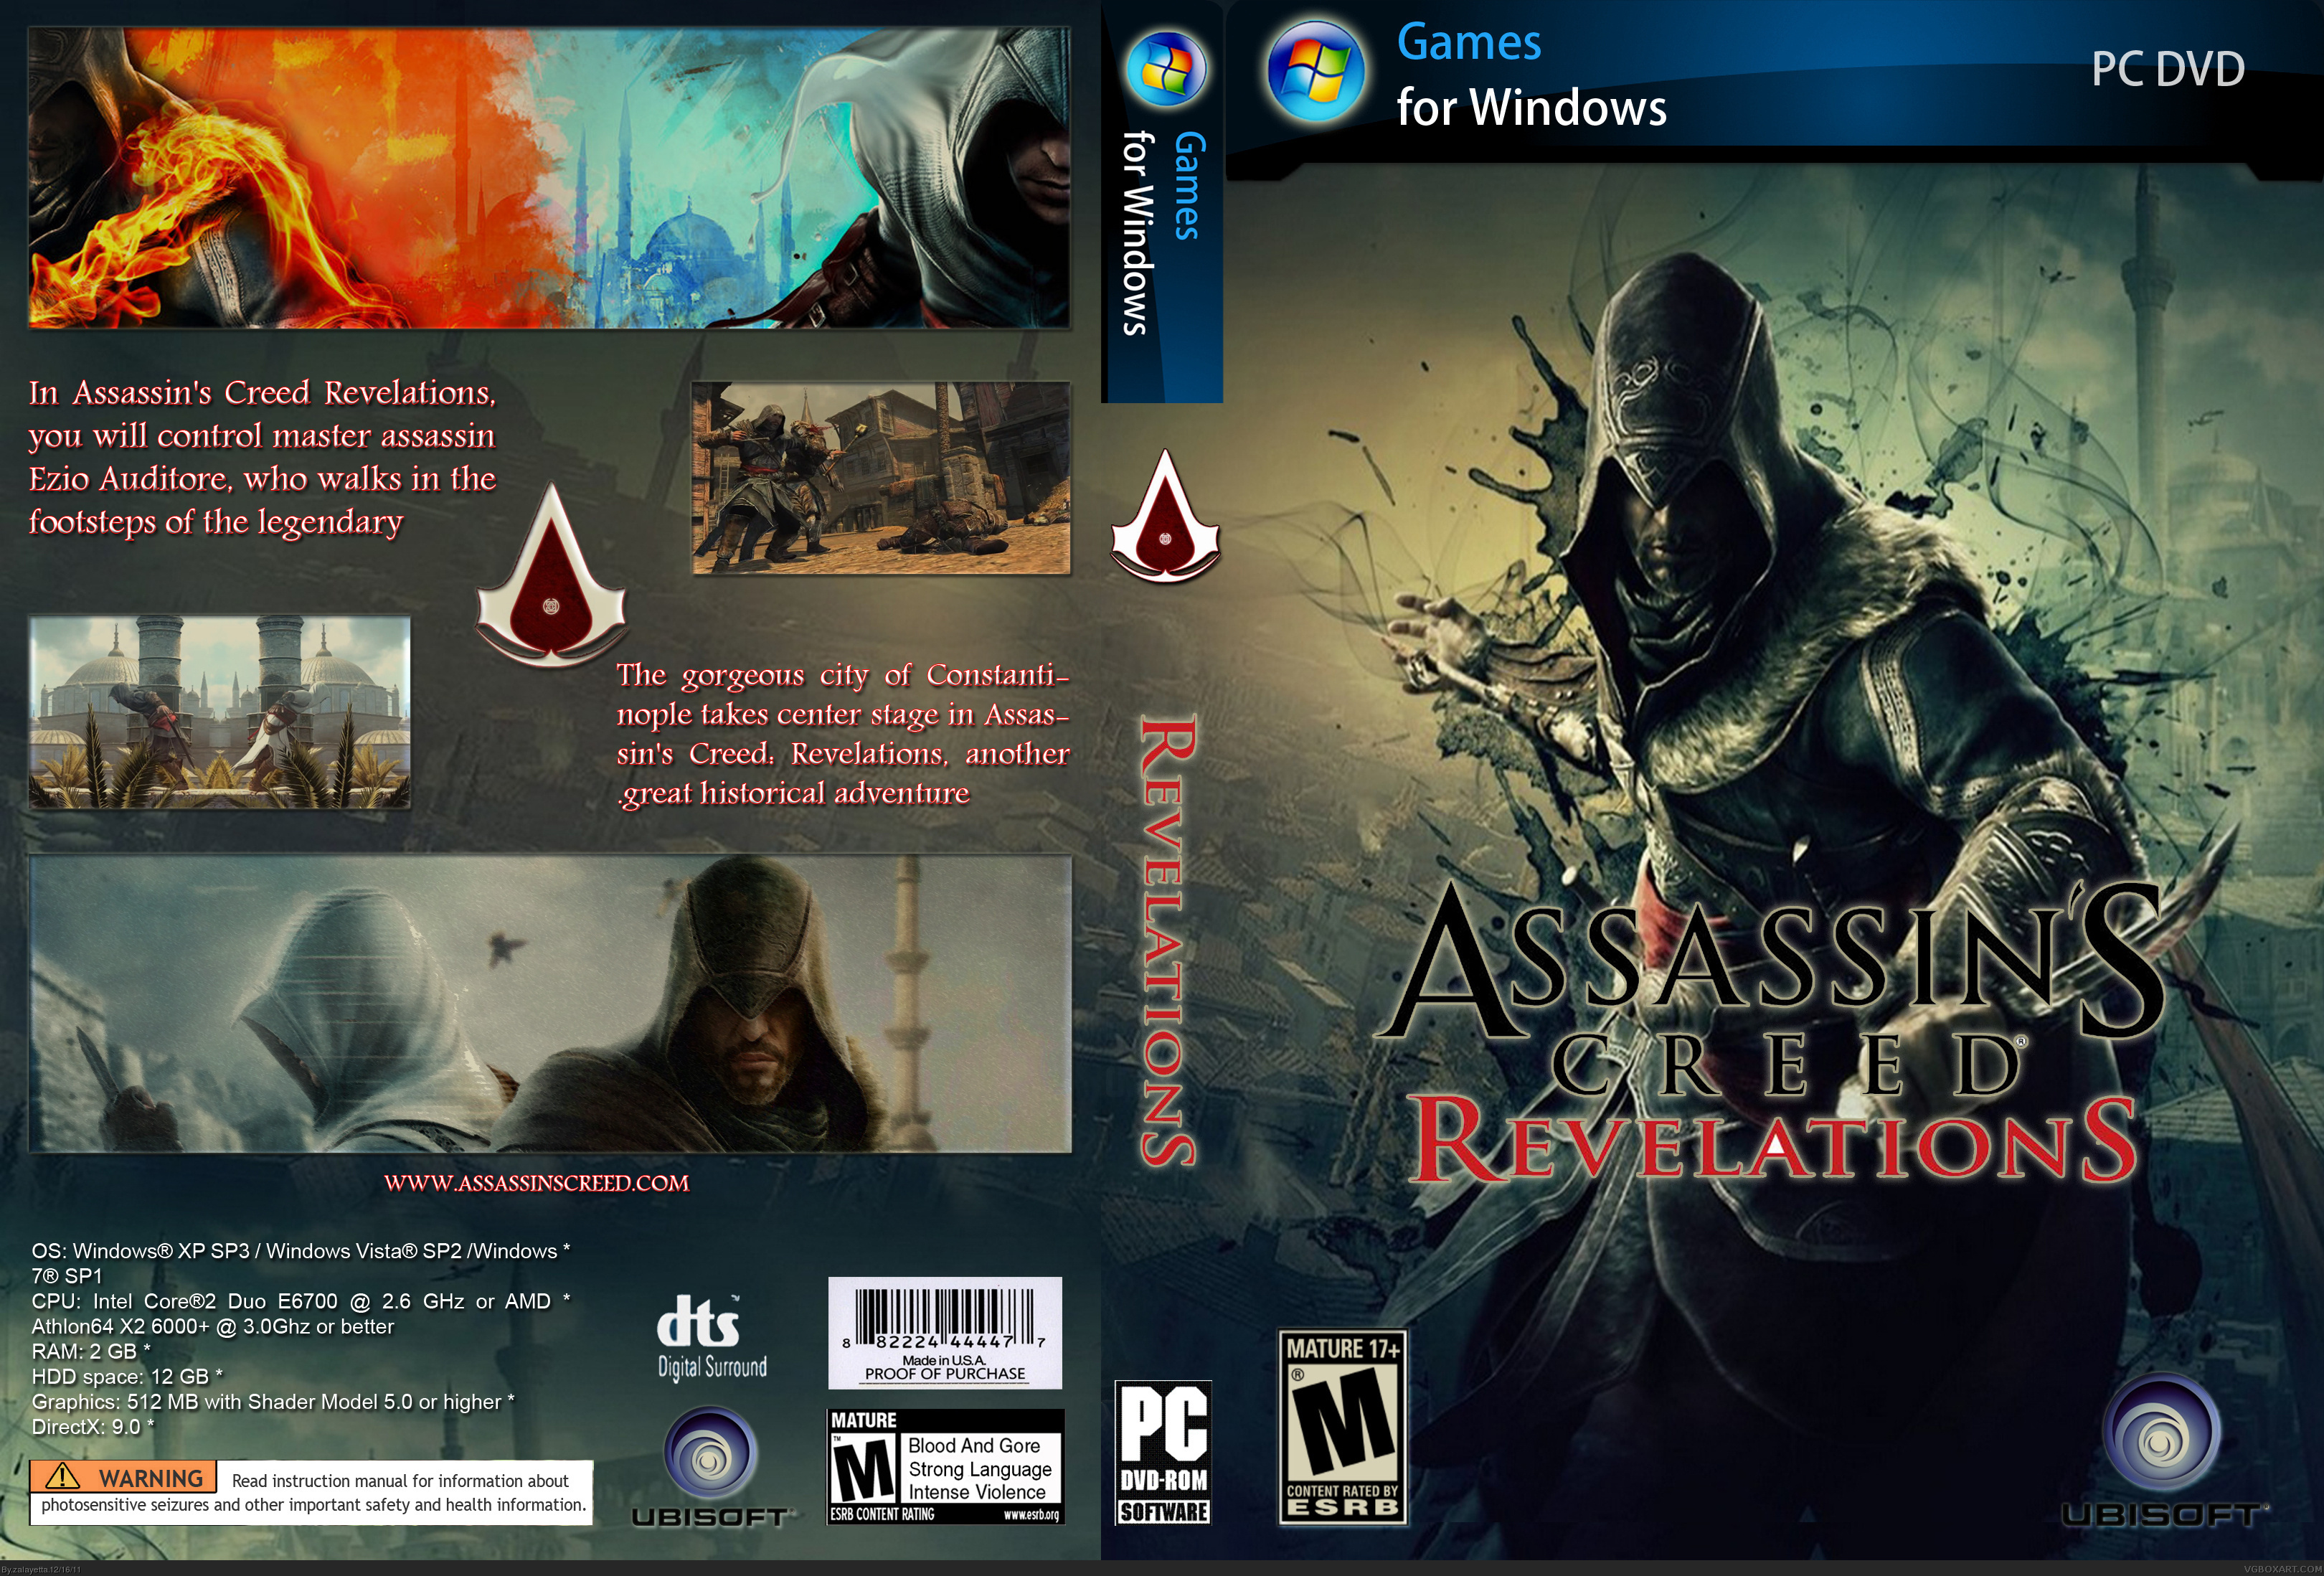 Assassin's Creed: Revelations box cover